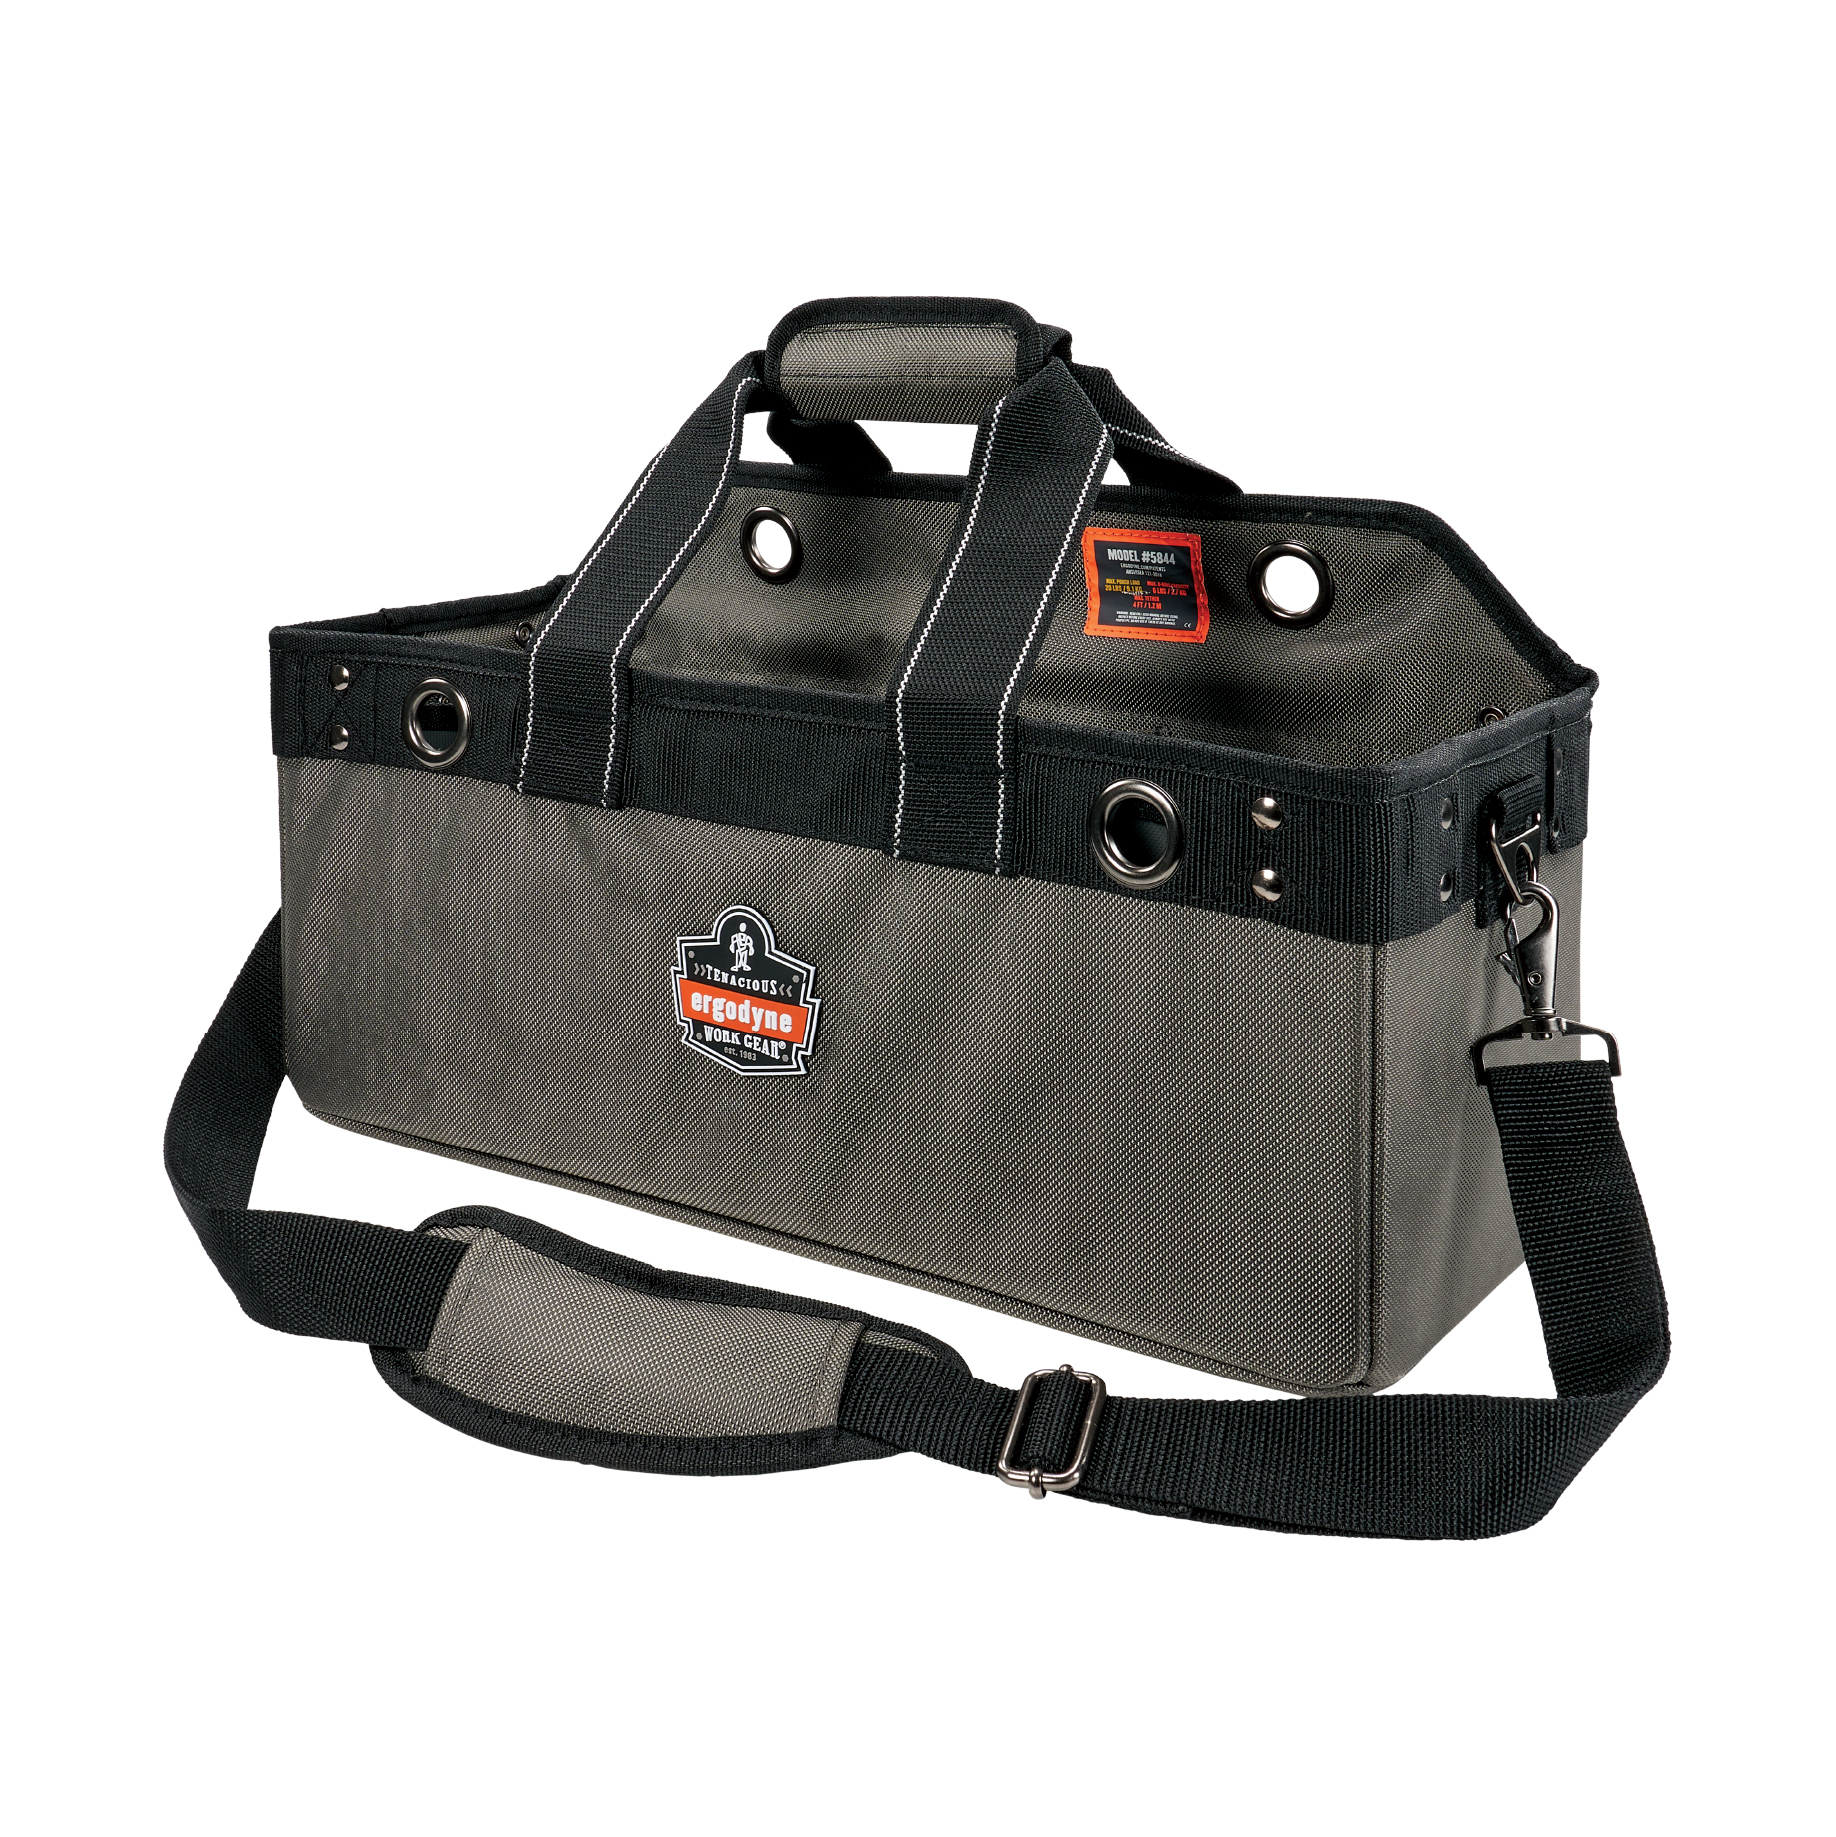 Ergodyne Arsenal 5844 Bucket Truck Tool Bag with Tool Tethering Attachment Points from GME Supply